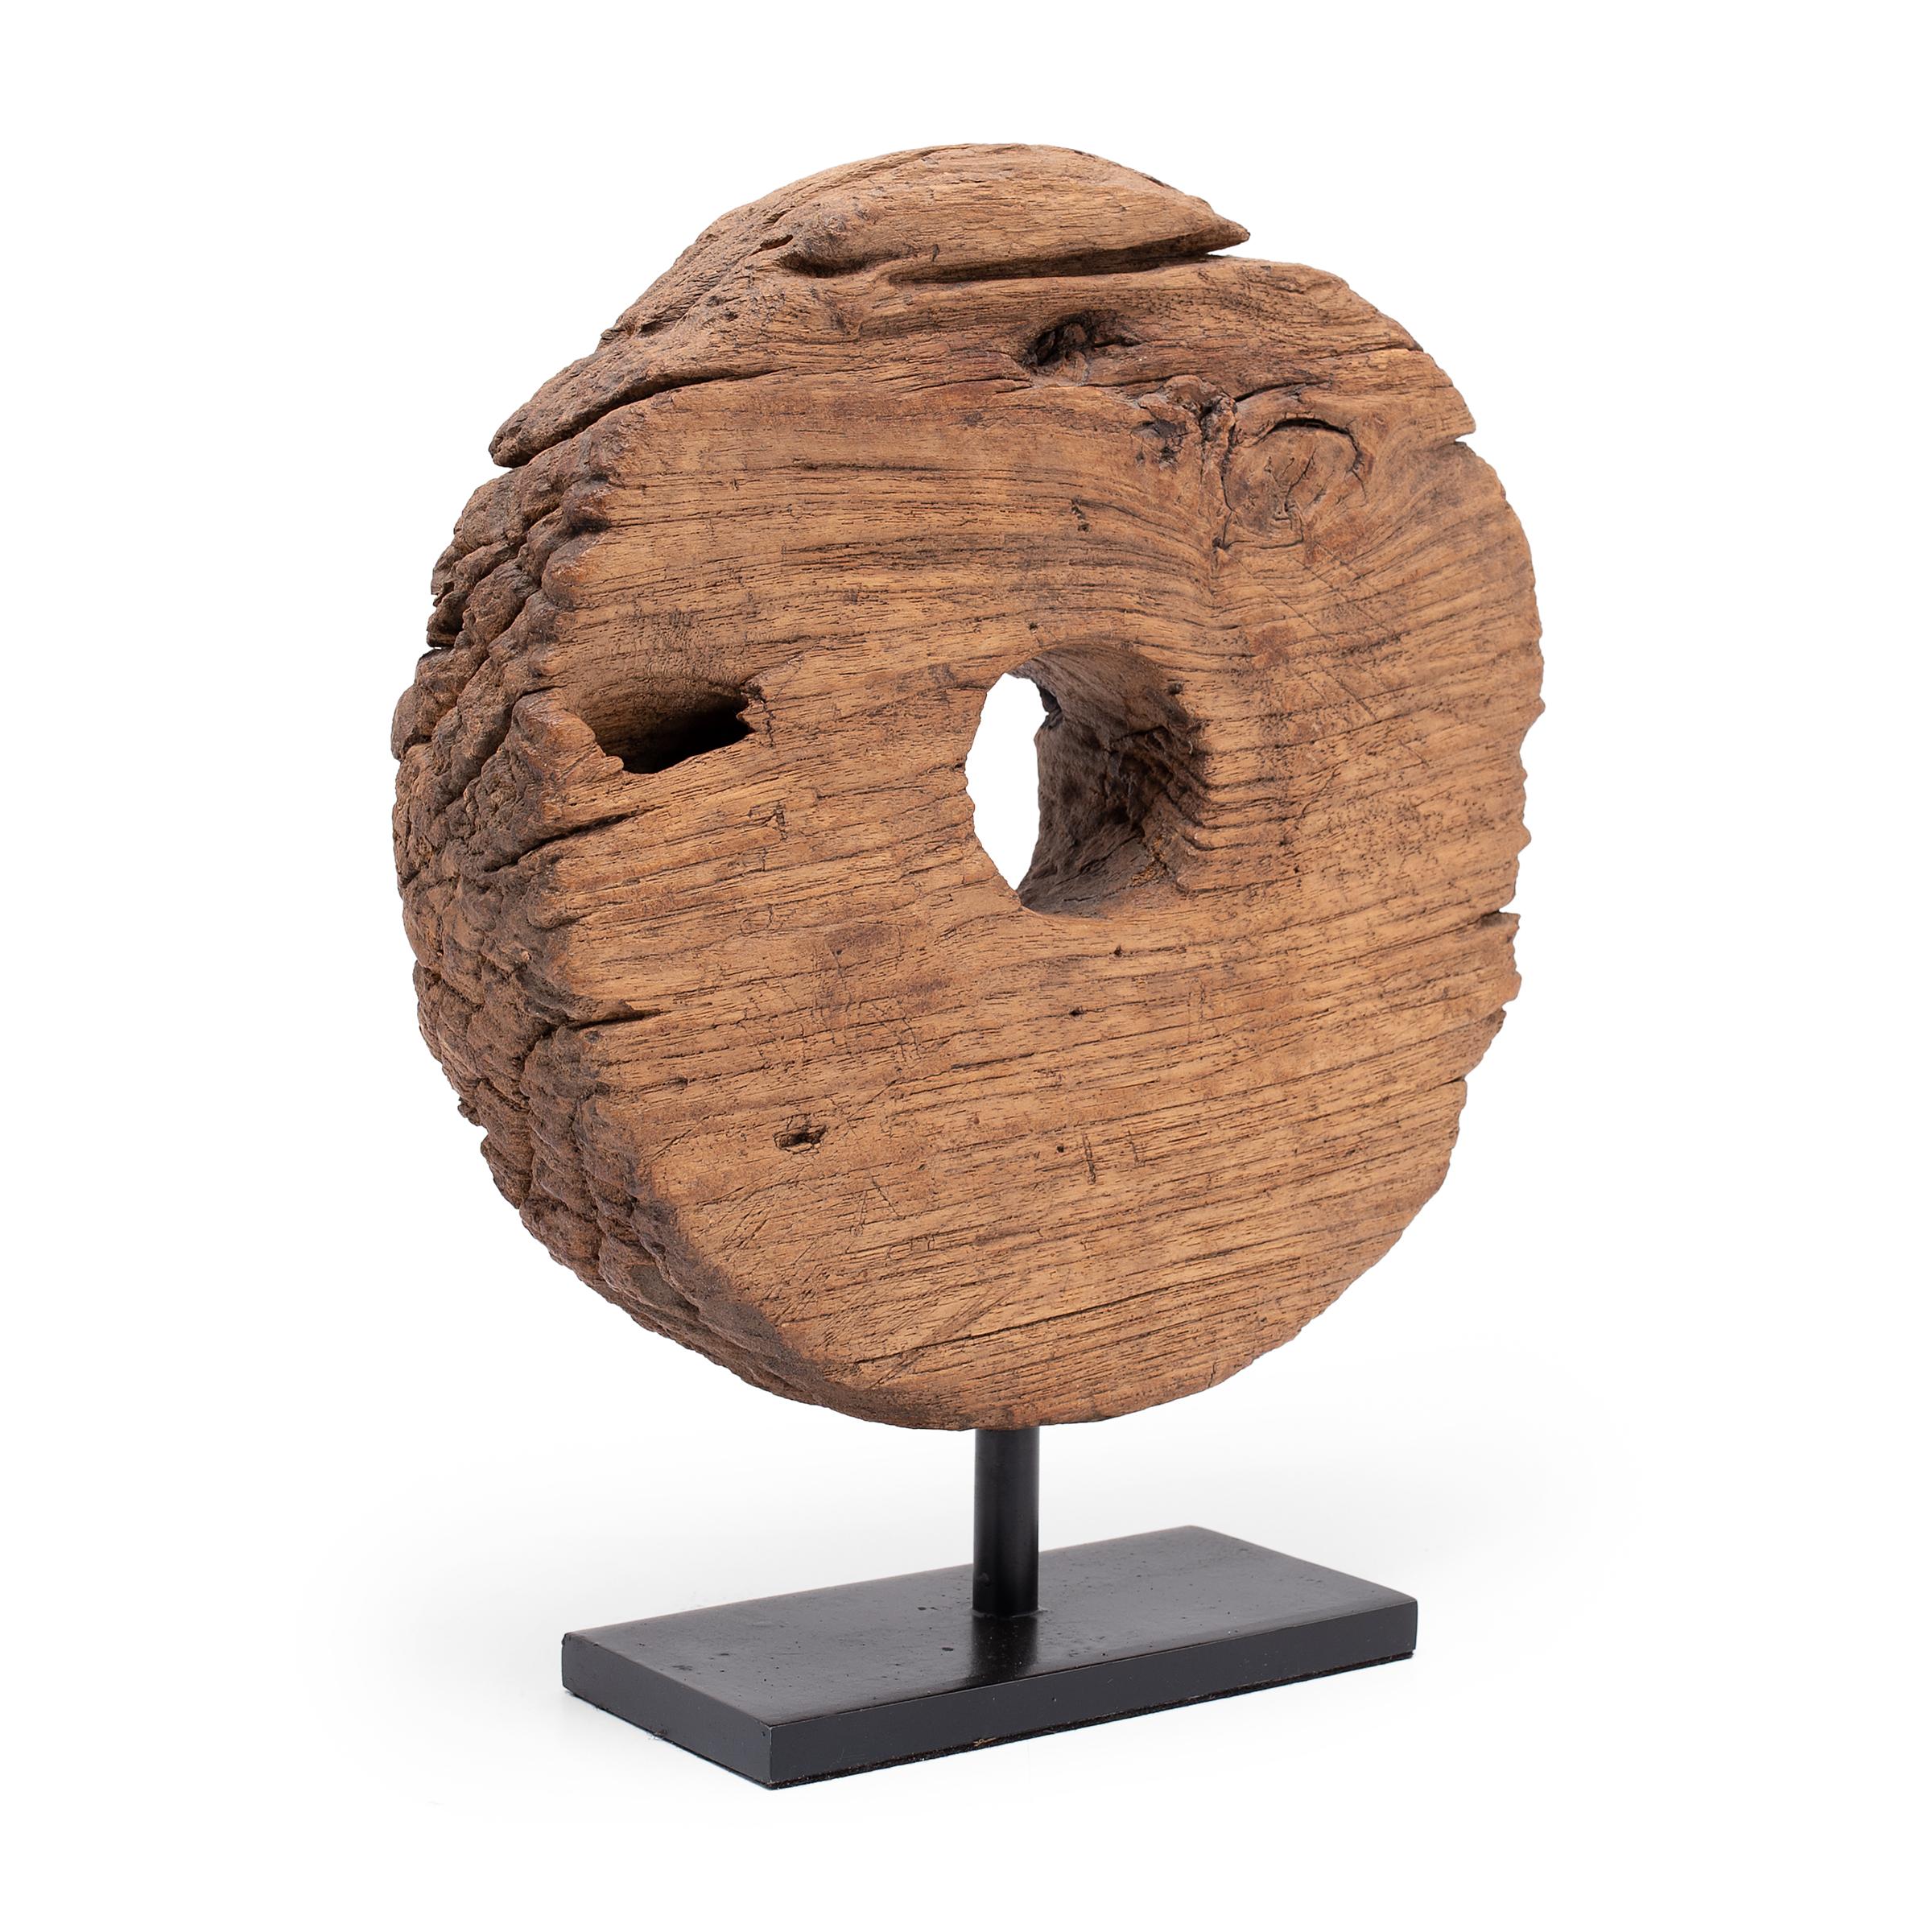 This 19th-century wooden farm cart wheel captivates with simple lines and wabi-sabi textures. The expressive grain of Chinese northern elm (yumu) is on full display, beautifully aged with deep grooves and softened by a rich patina. Elevated by a